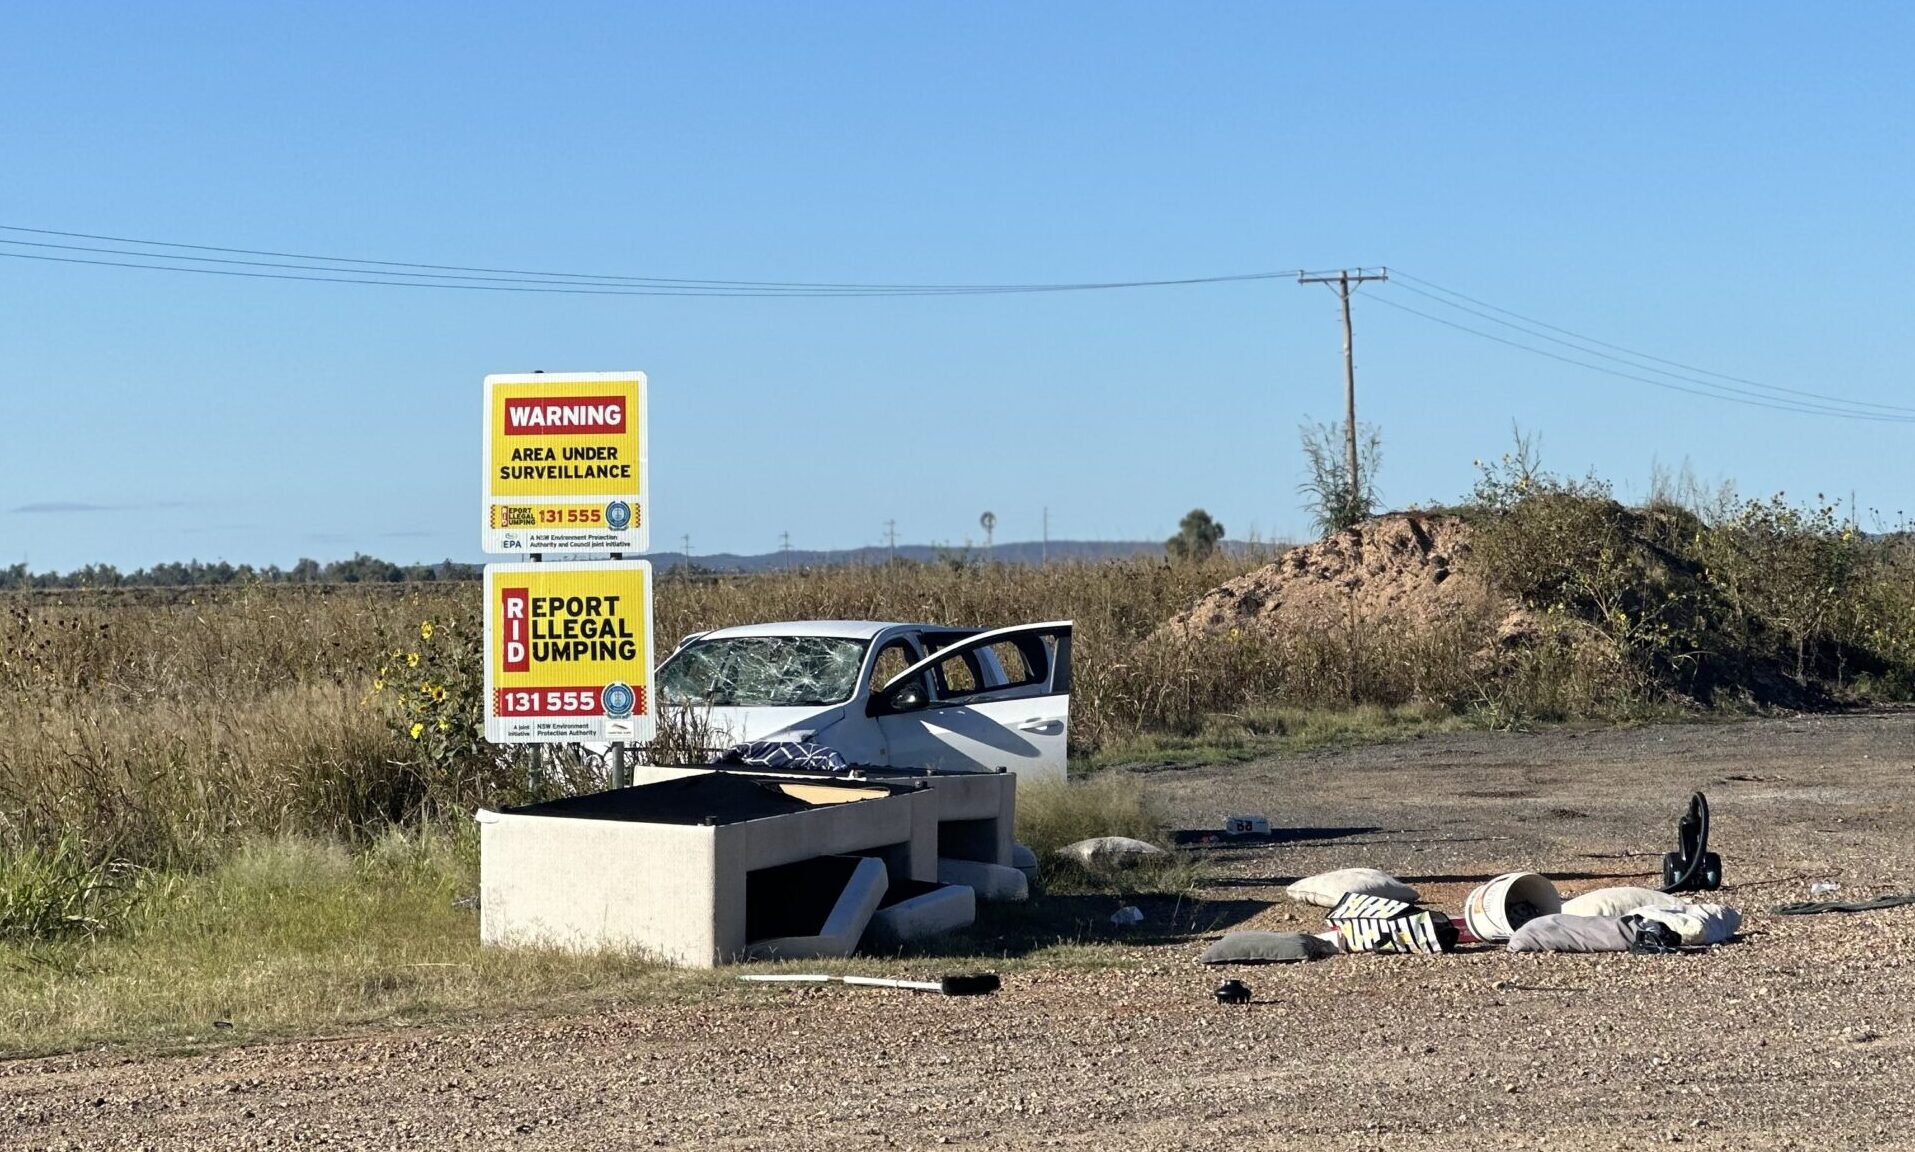 Concerns voiced about recurrent illegal dumping near northern town entrance to Narrabri